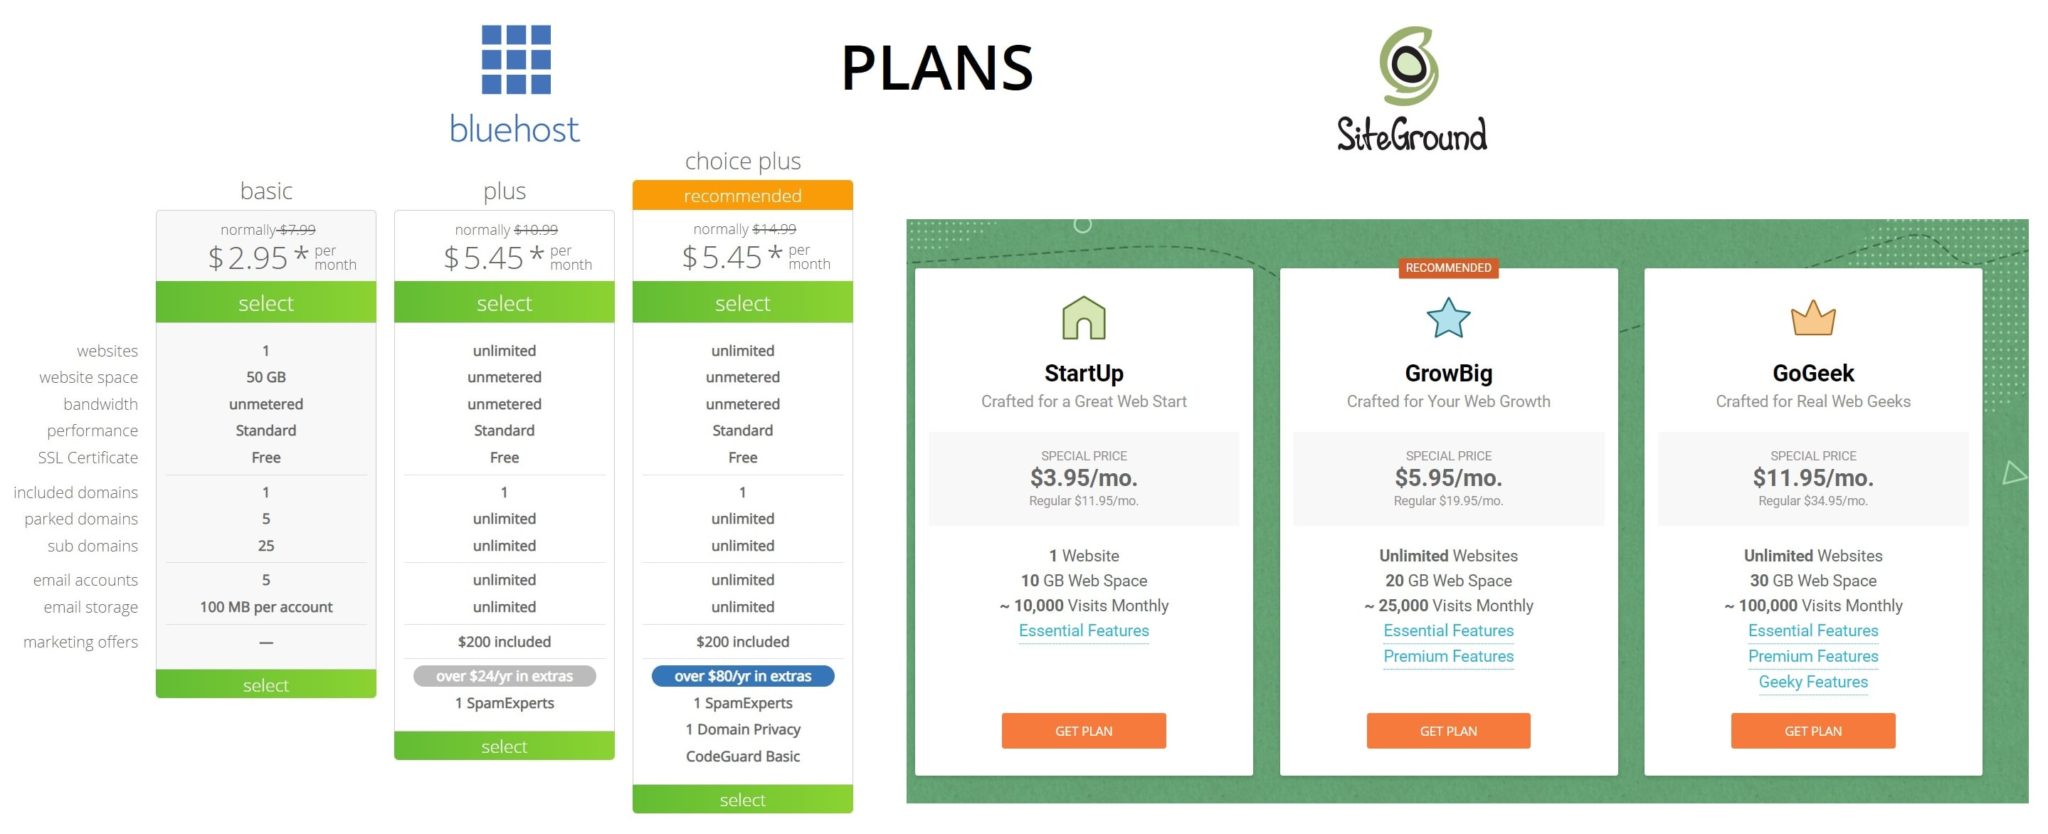 Bluehost vs Siteground pricing plans